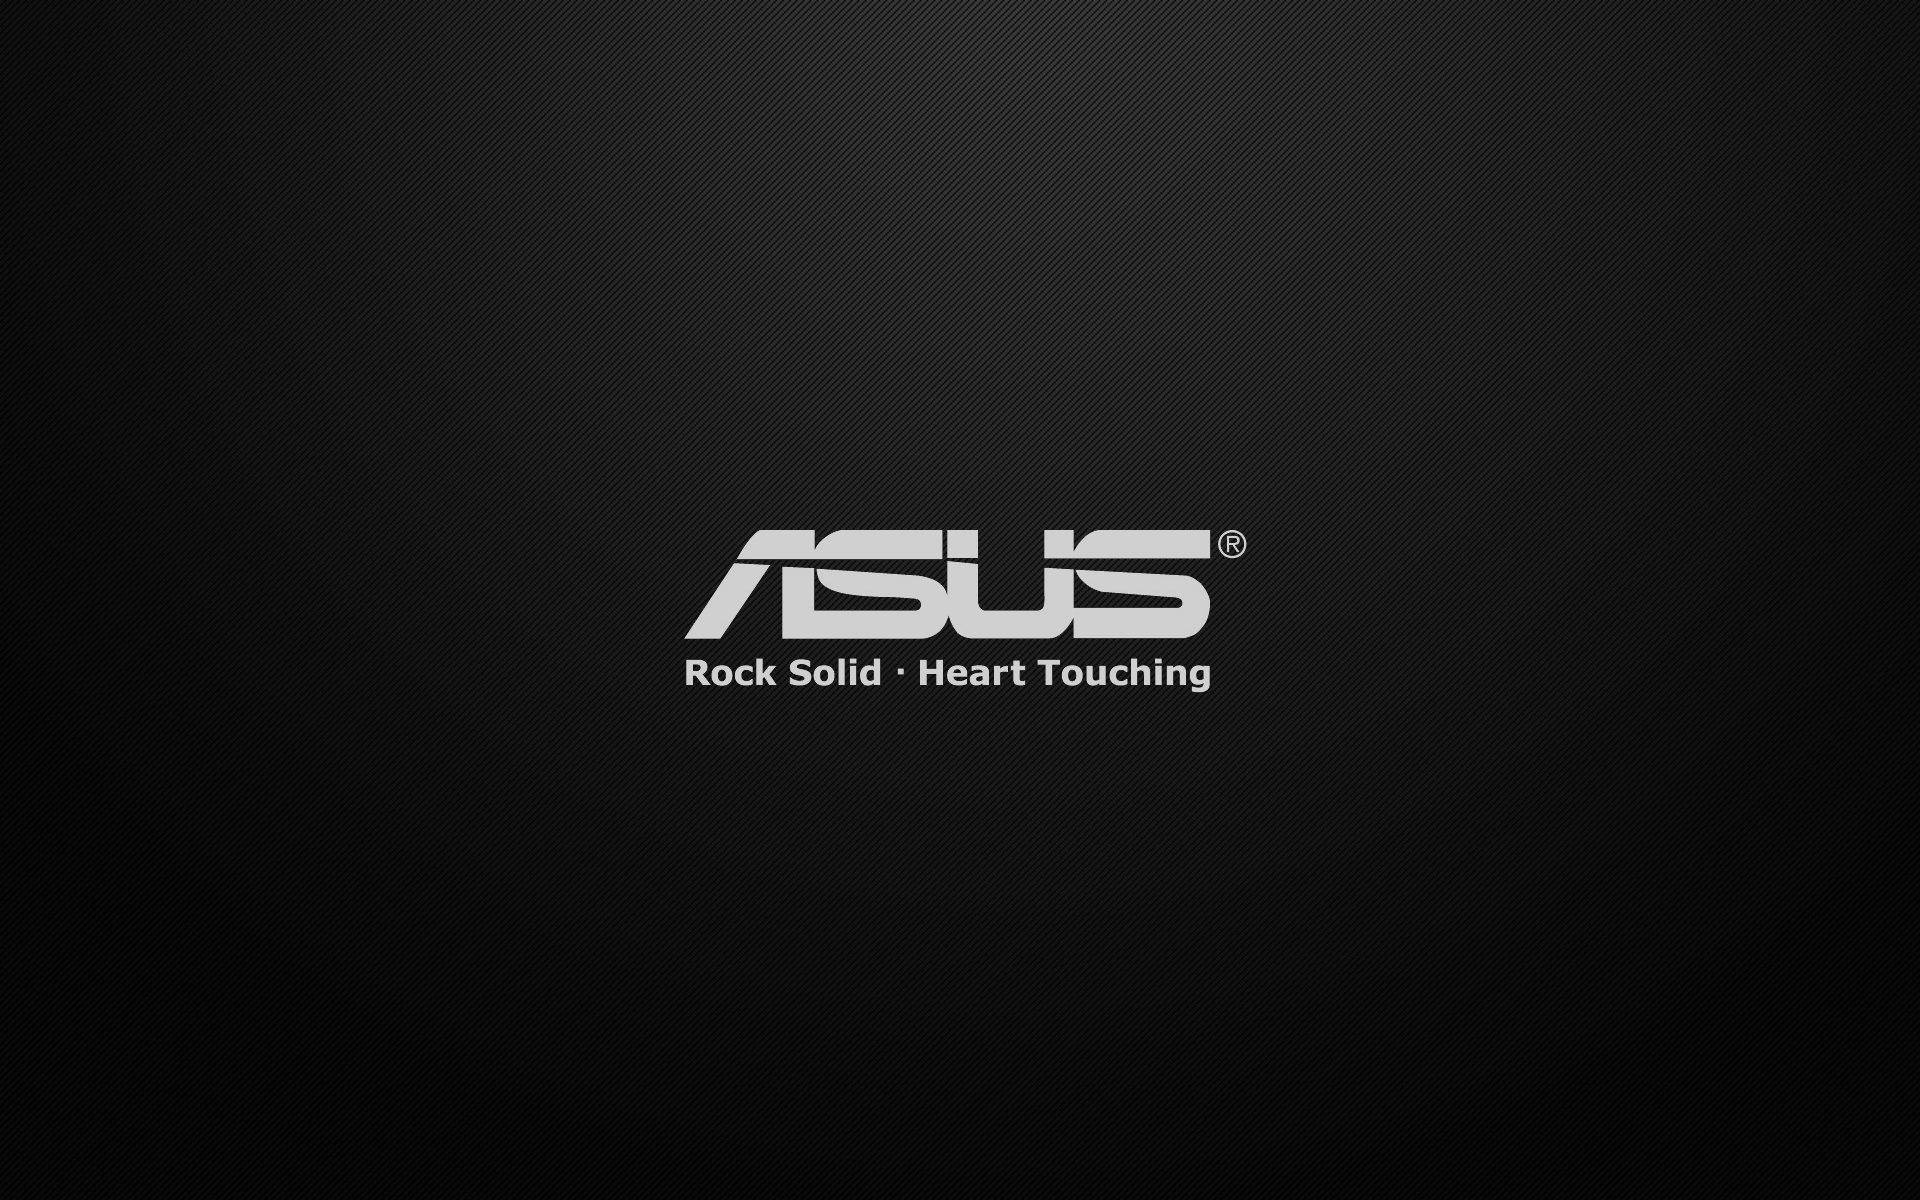 Stunning image of Asus logo against a bright, vibrant background. Wallpaper